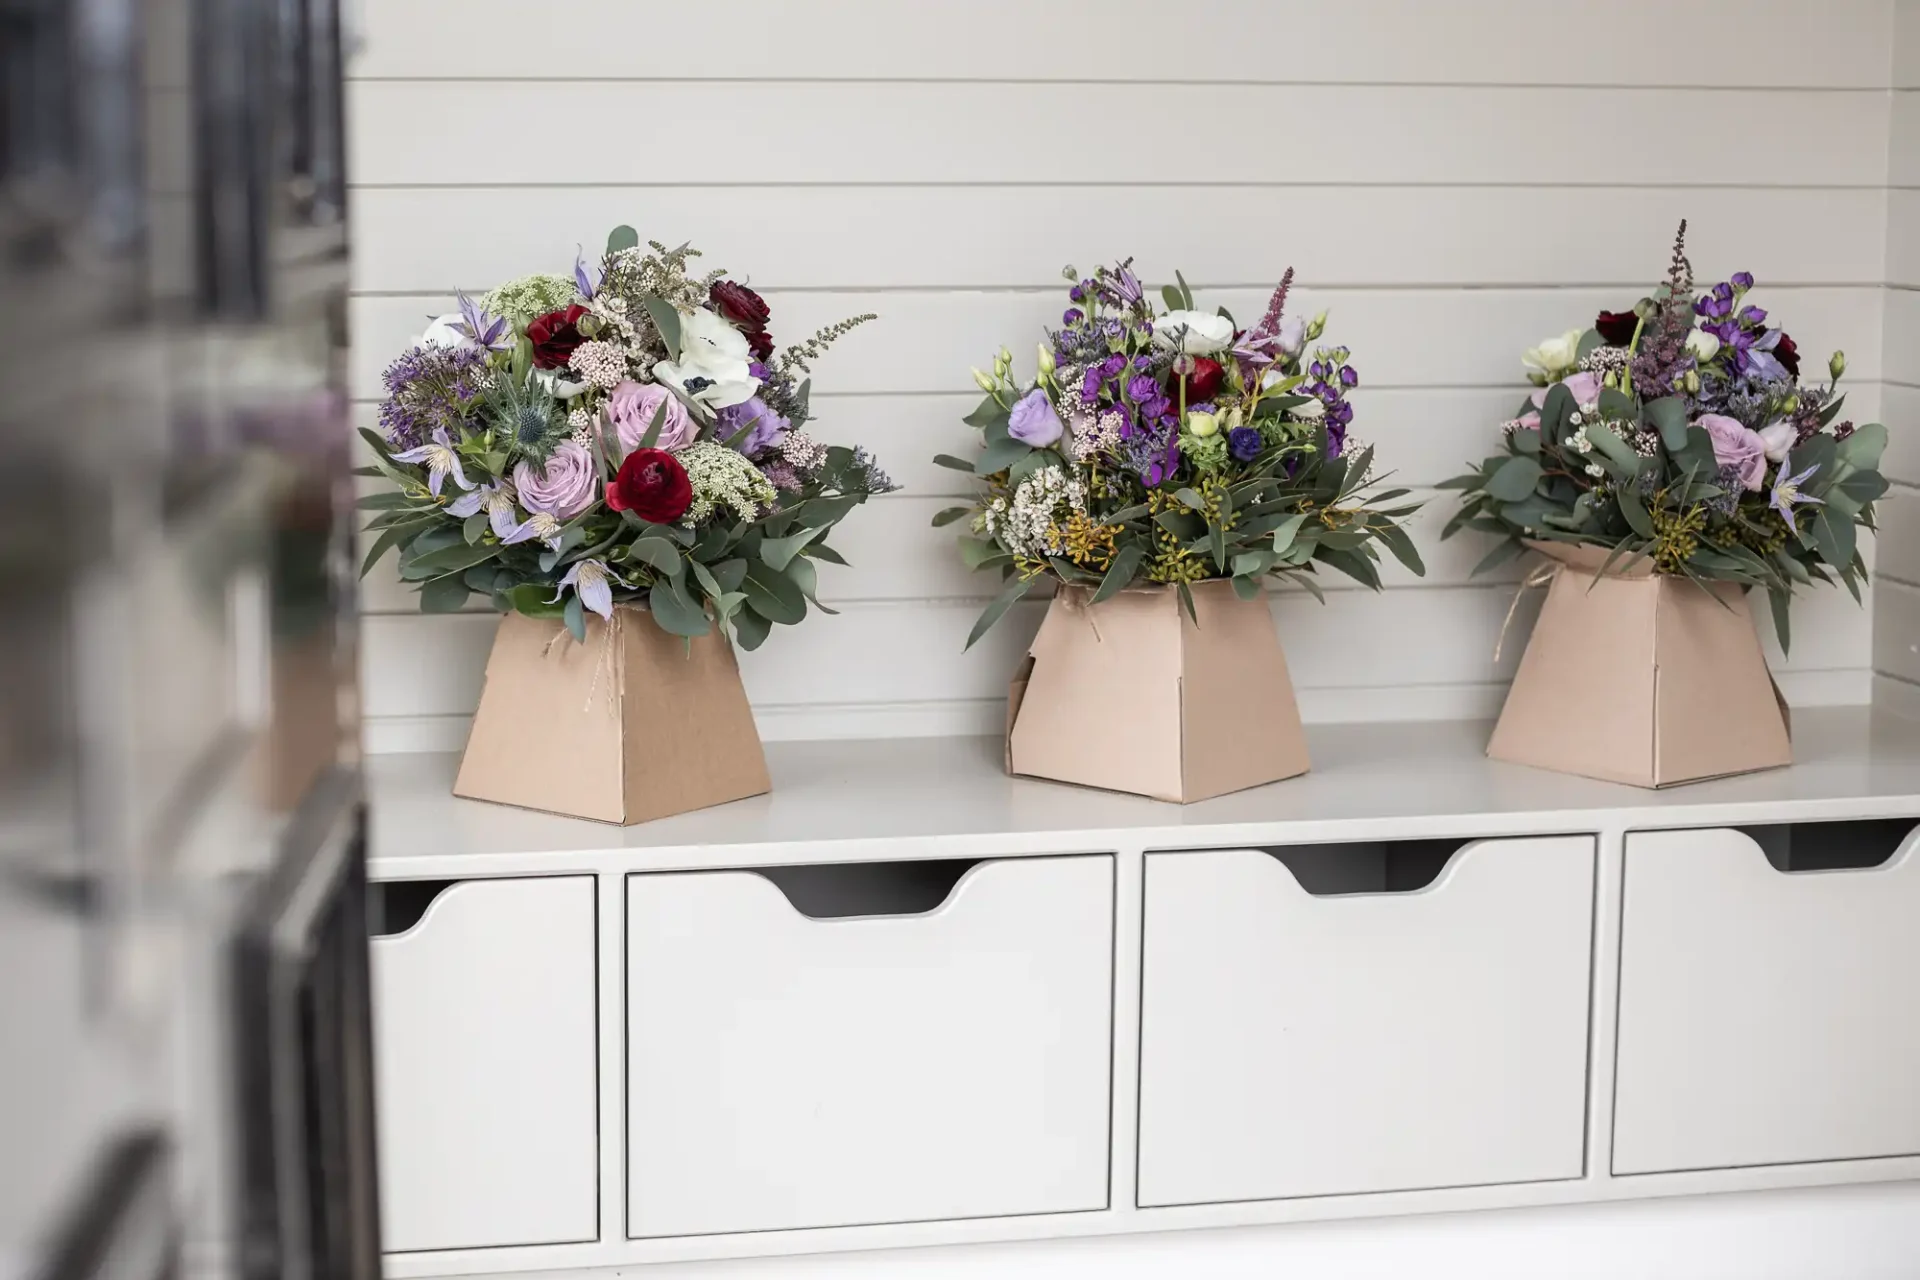 Three bouquets of mixed flowers in brown paper vases are placed on a white storage unit with drawers.